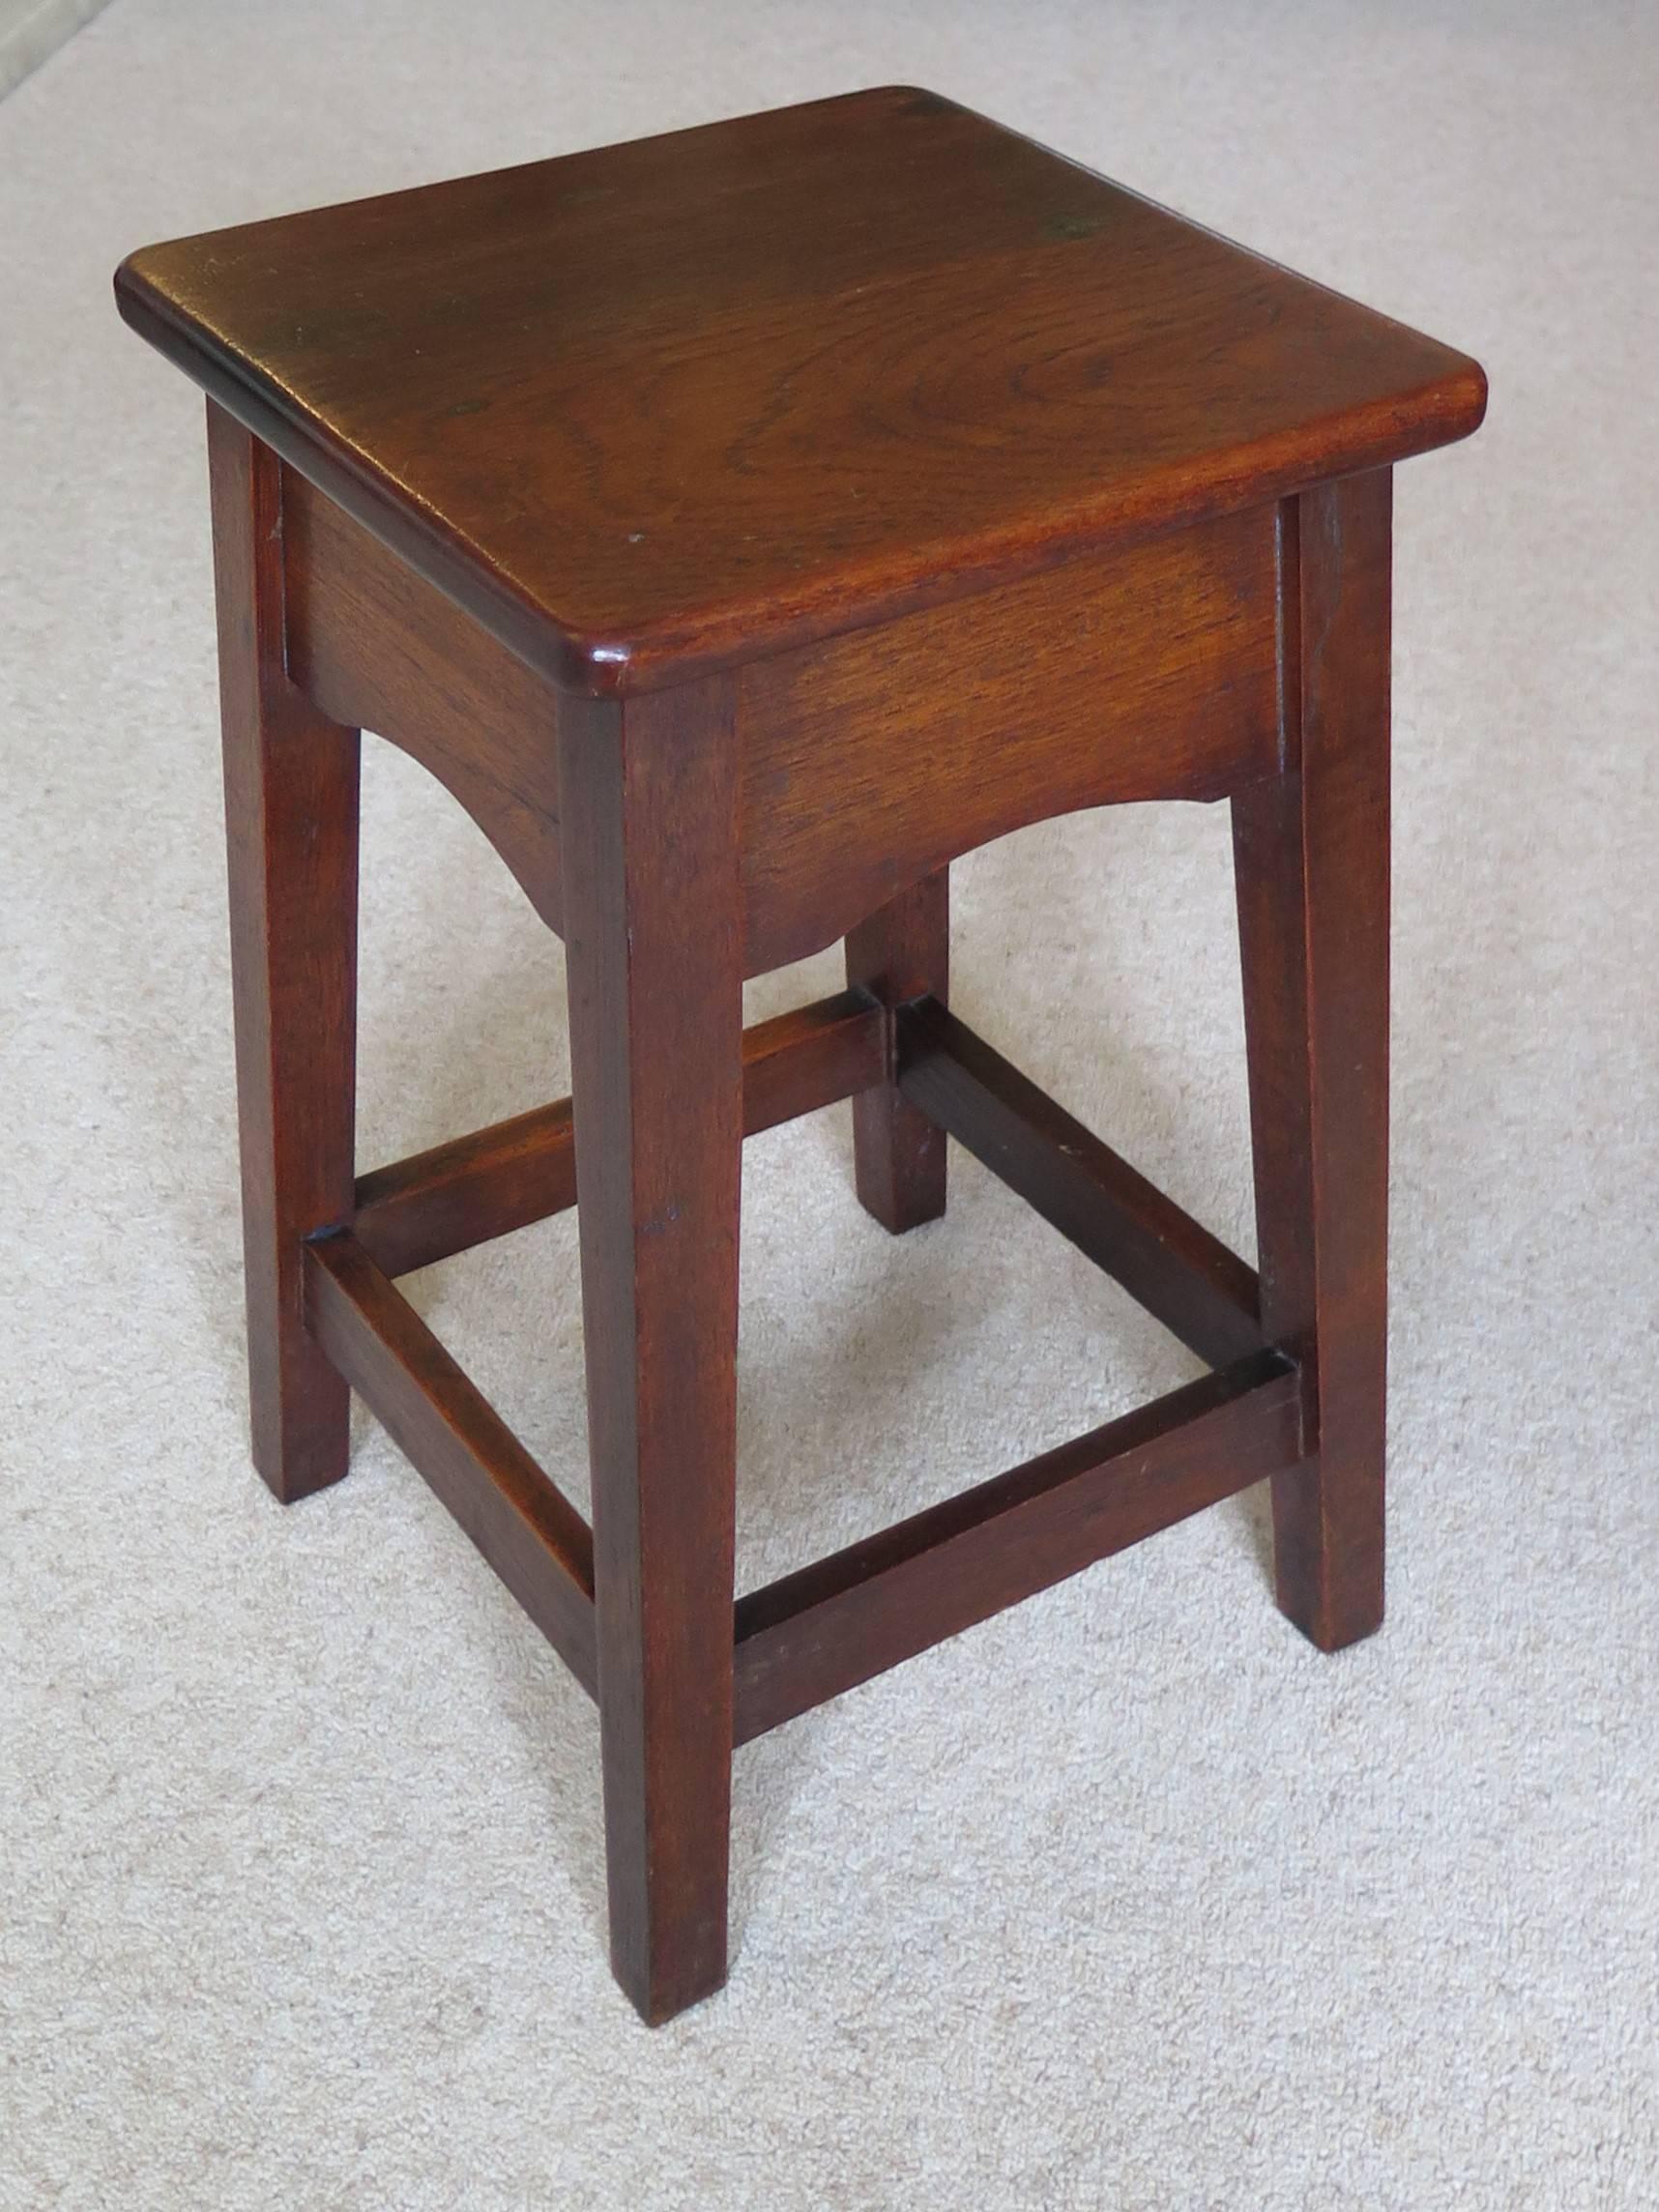 Hand-Crafted Edwardian handmade Solid Oak & Elm Stool or Stand,  English circa 1900